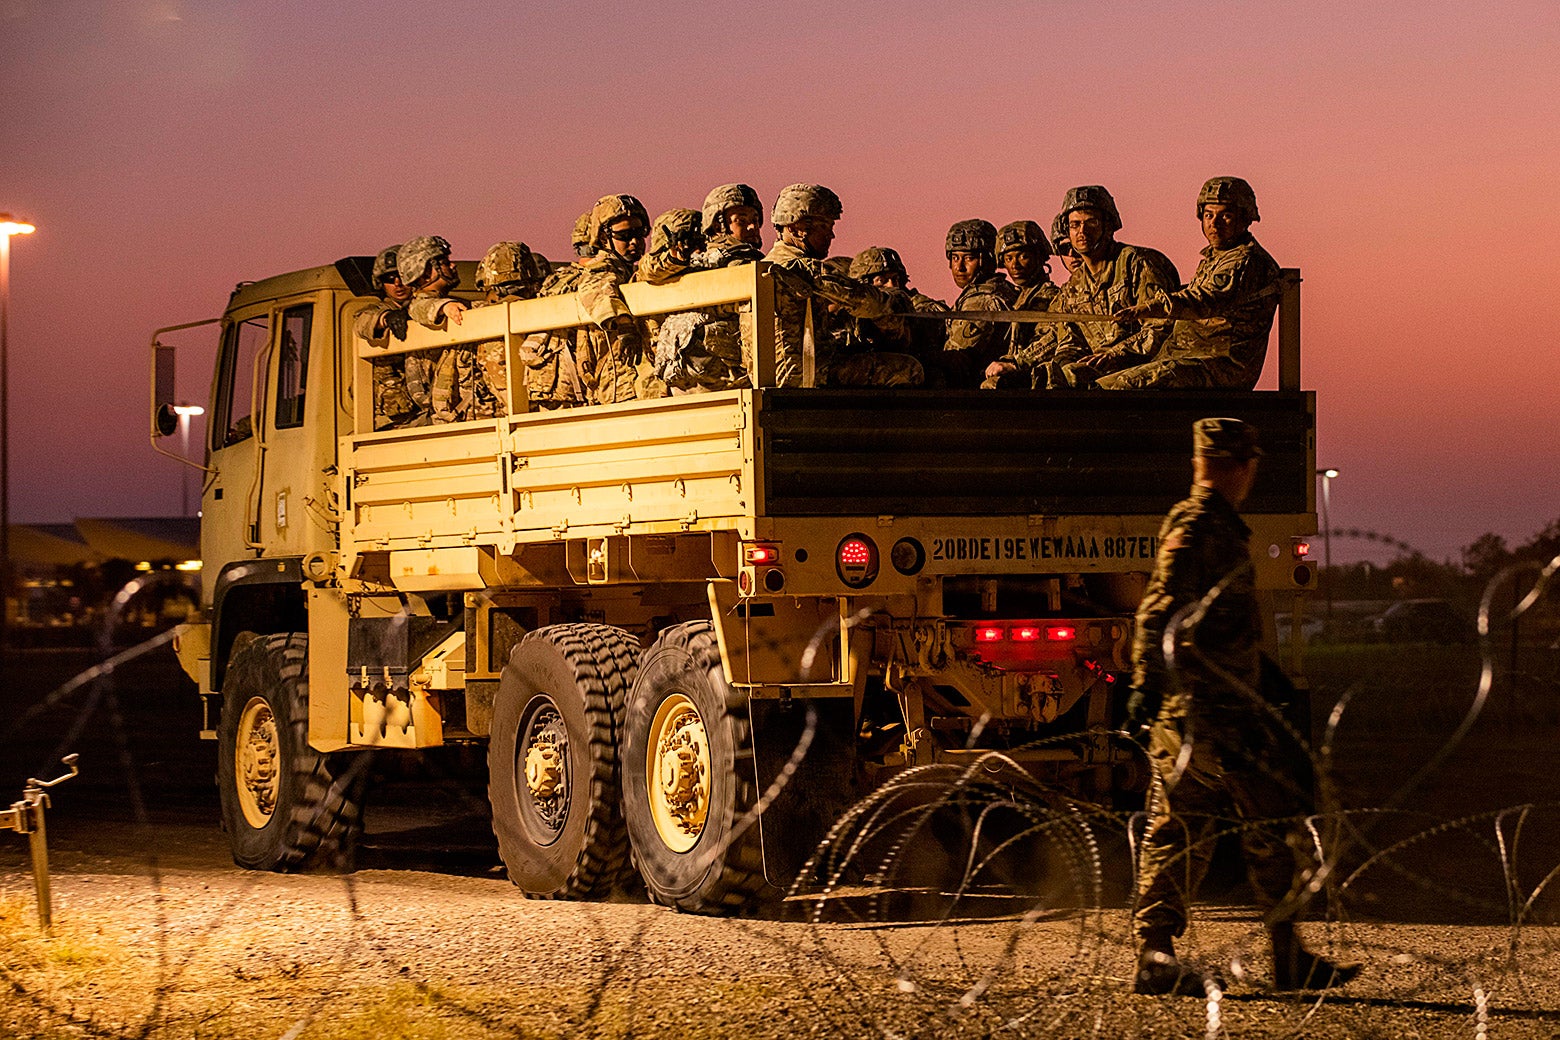 U.S. Army troops enter a compound where the military is erecting an encampment near the U.S.-Mexico border crossing.